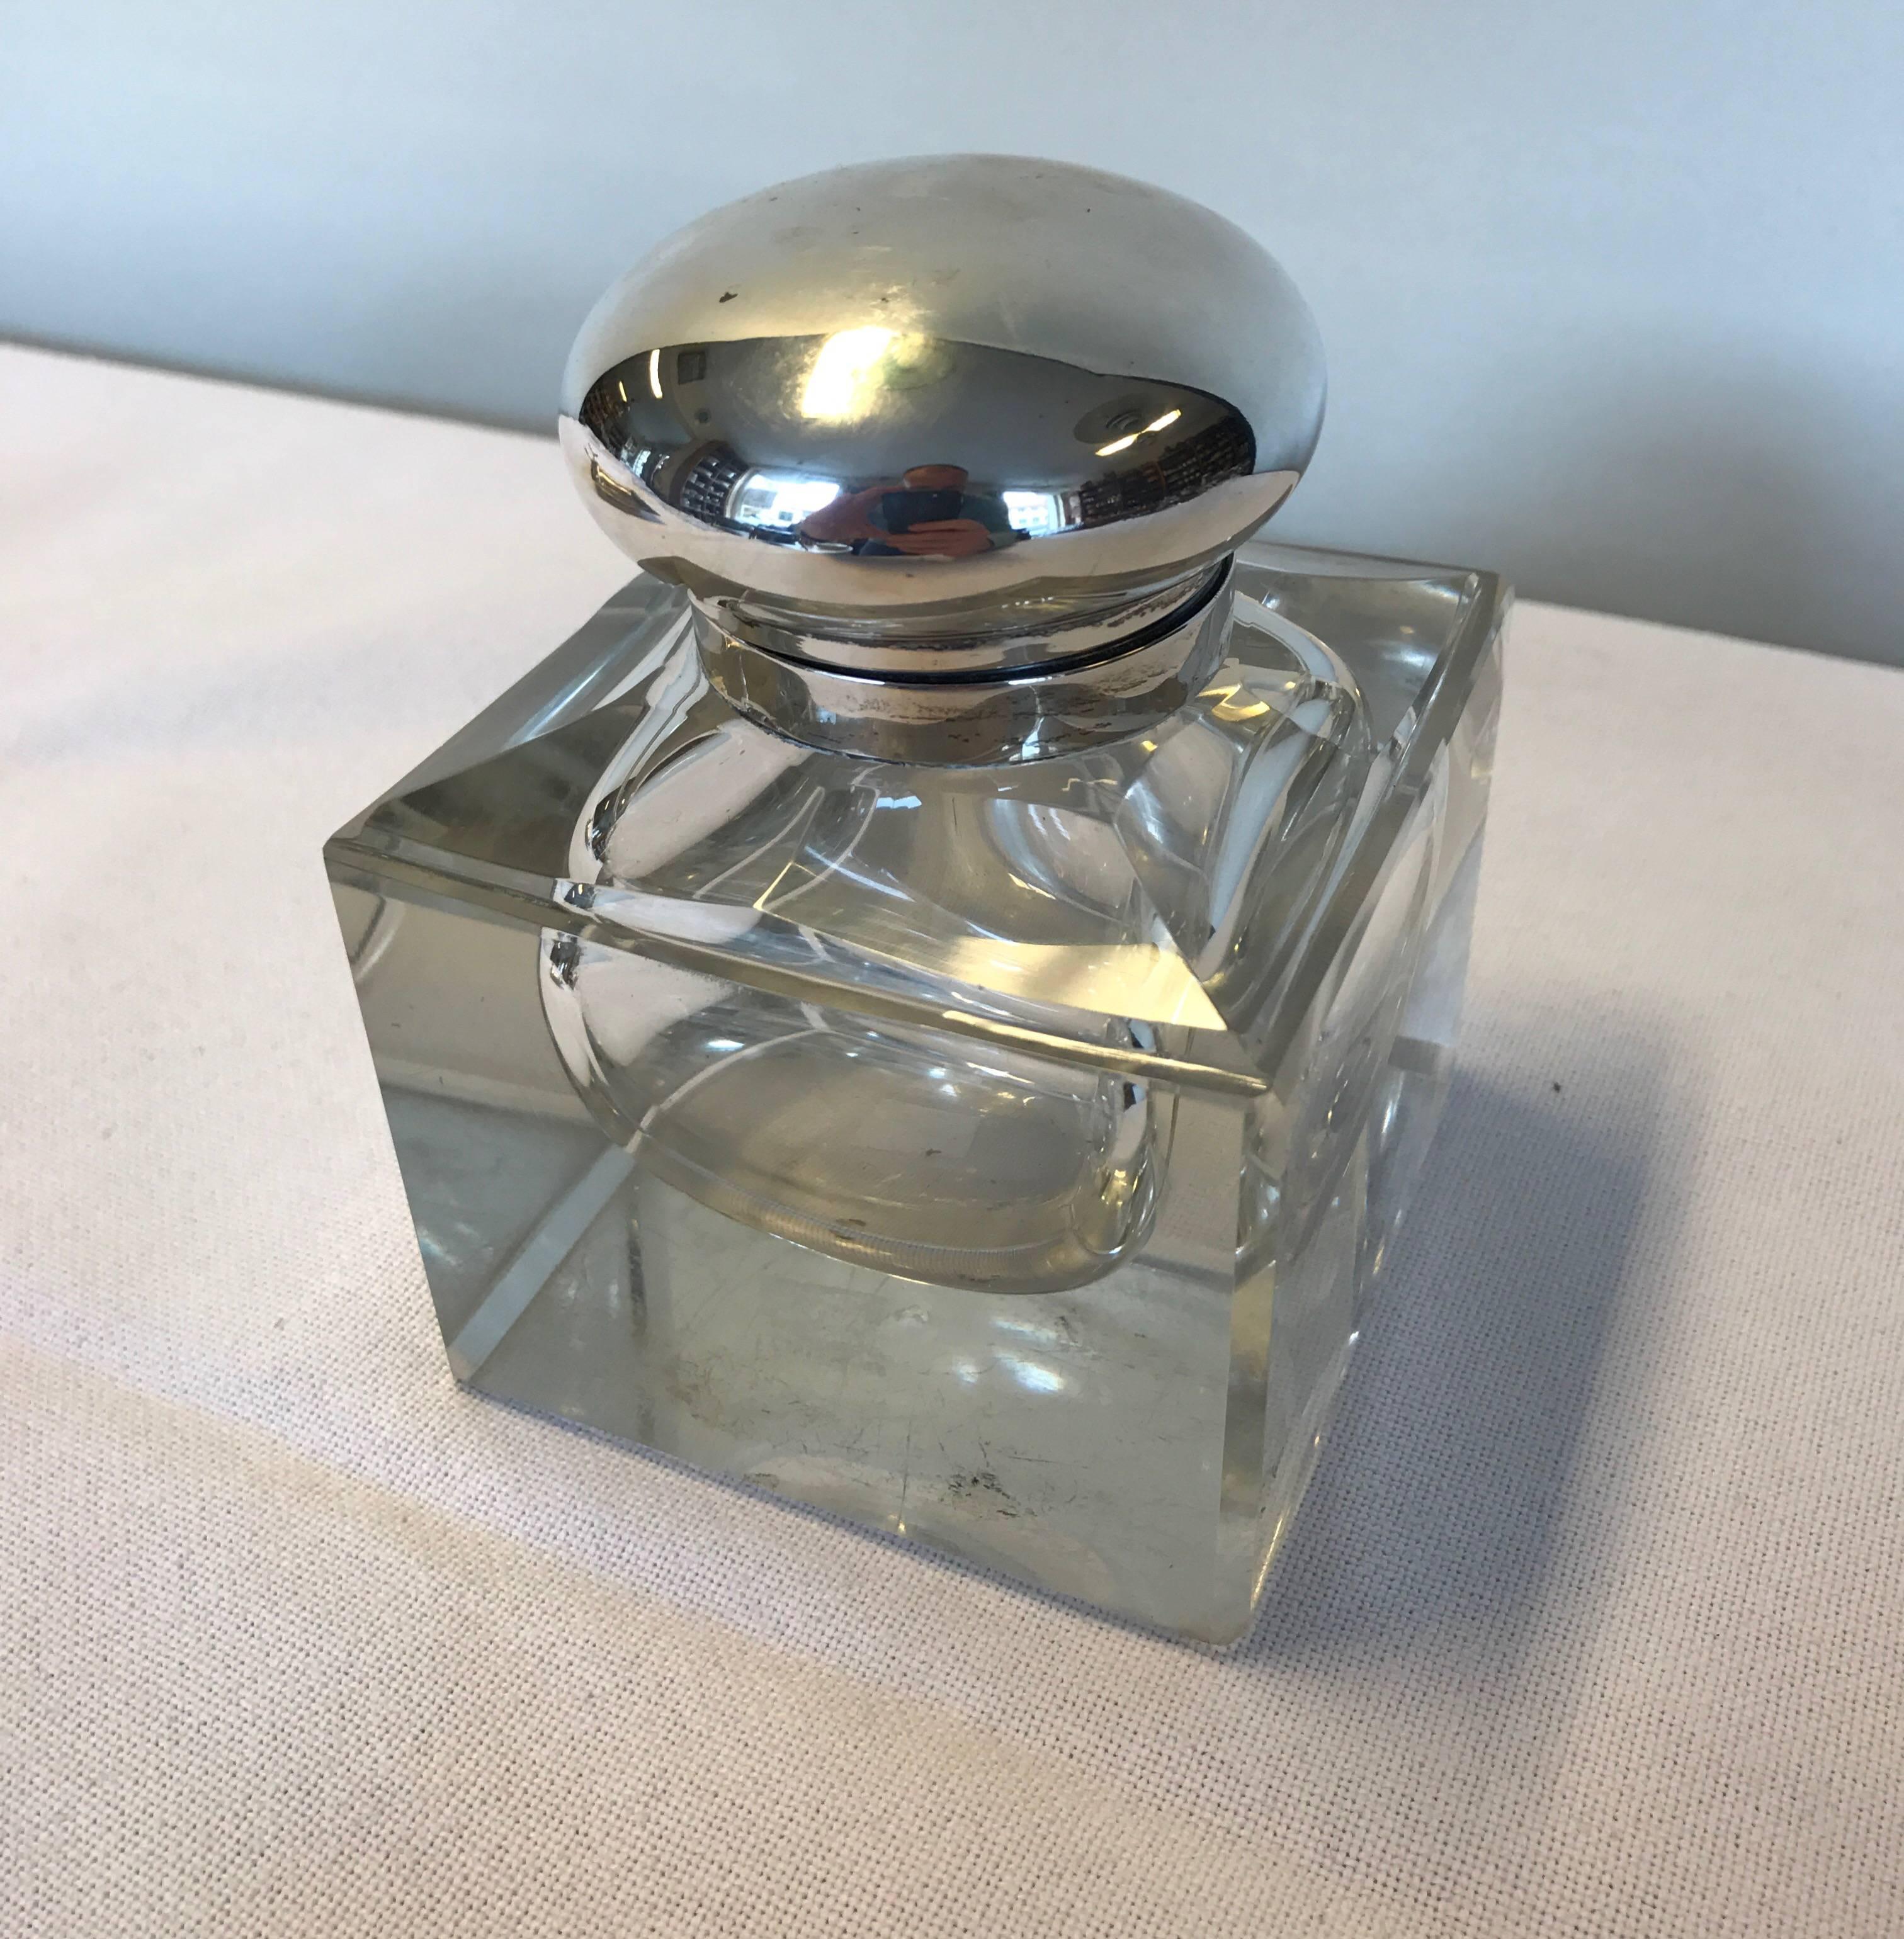 Silver and Crystal Inkwell from 1920s Denmark Copenhagen, Master Stamp C.H.F 1